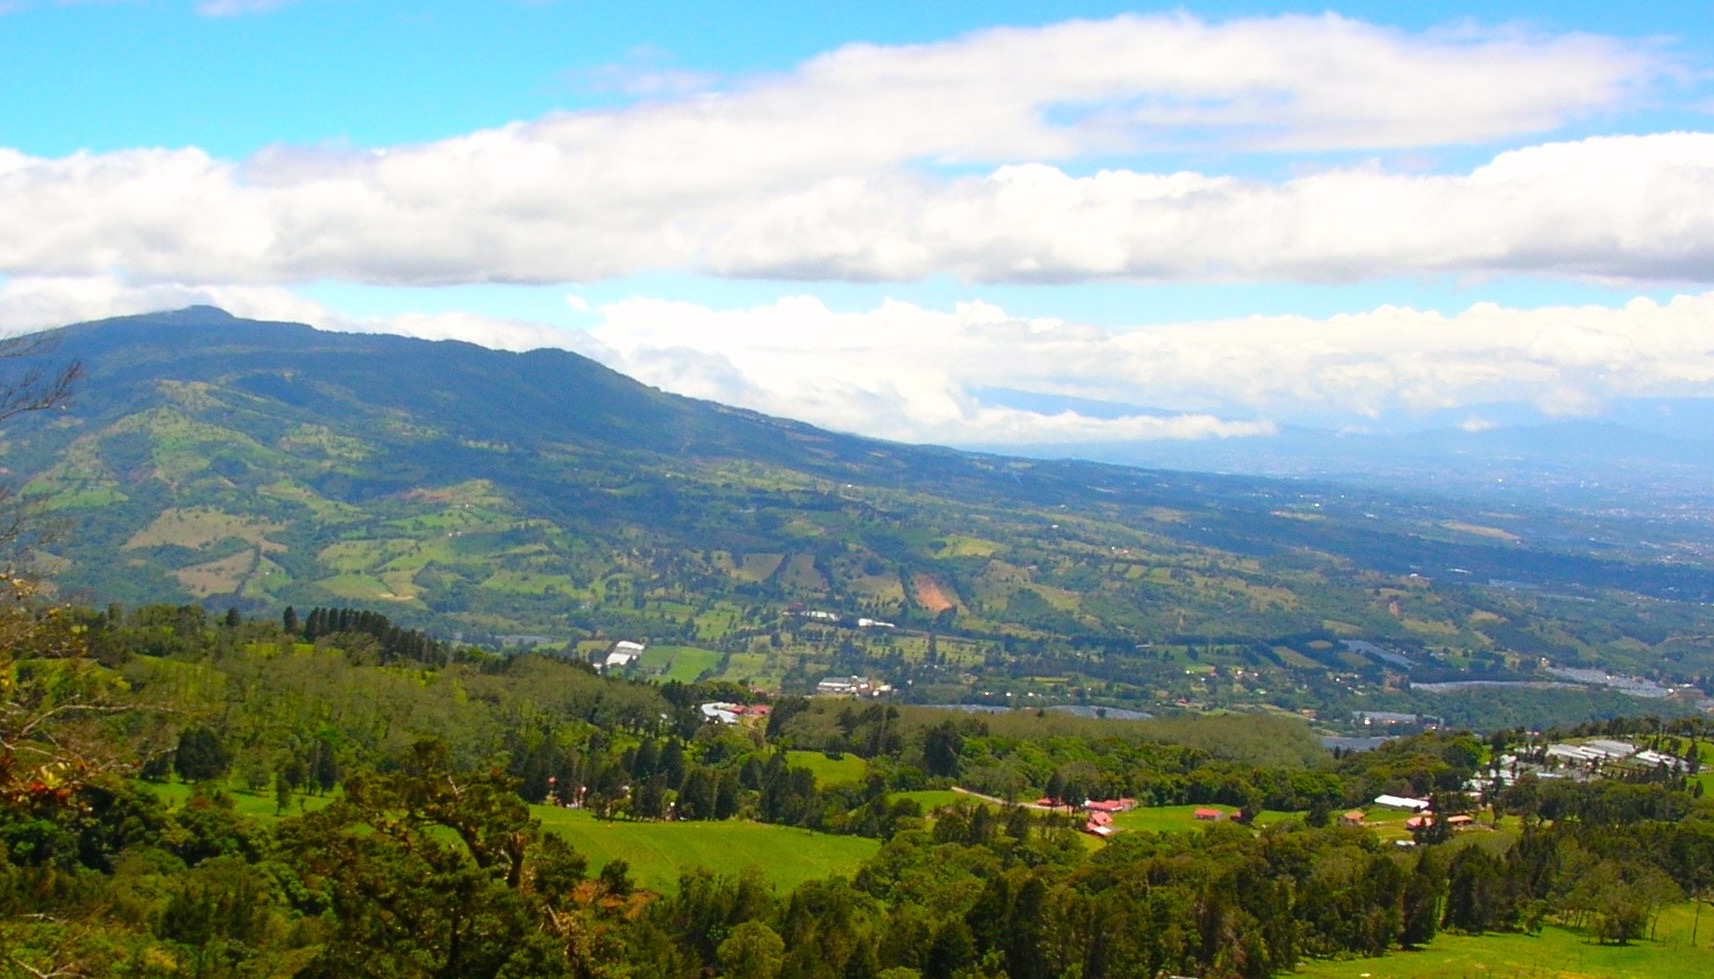 Views of the Naranjo Valley and its famous cofee plantations. Marla Norman